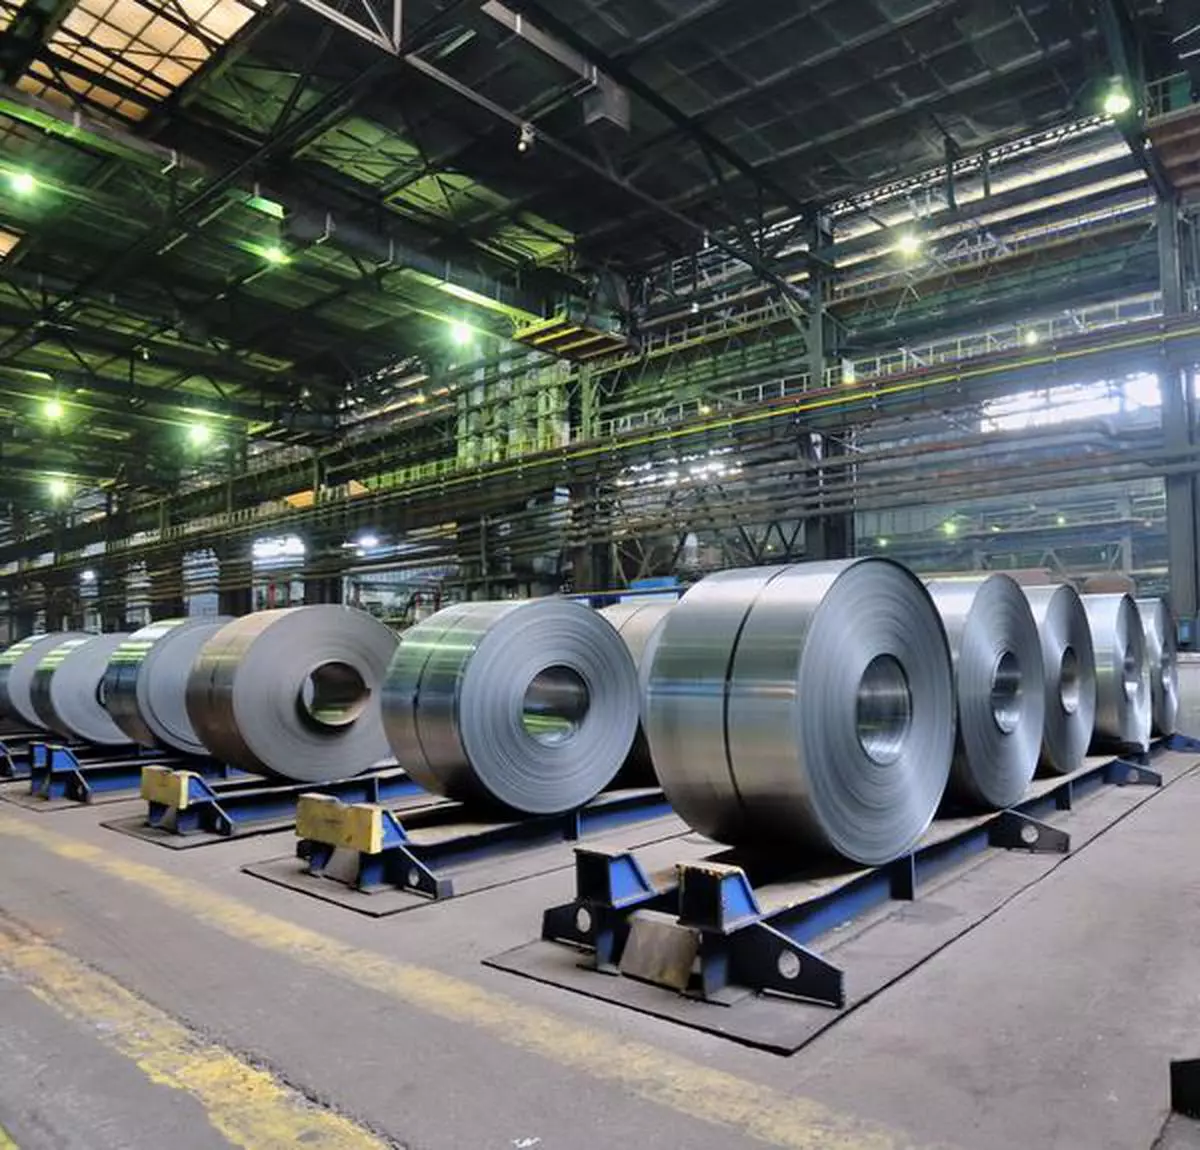 Shipments are mostly of rolled steel, coatings, flats, and long steel offerings.  